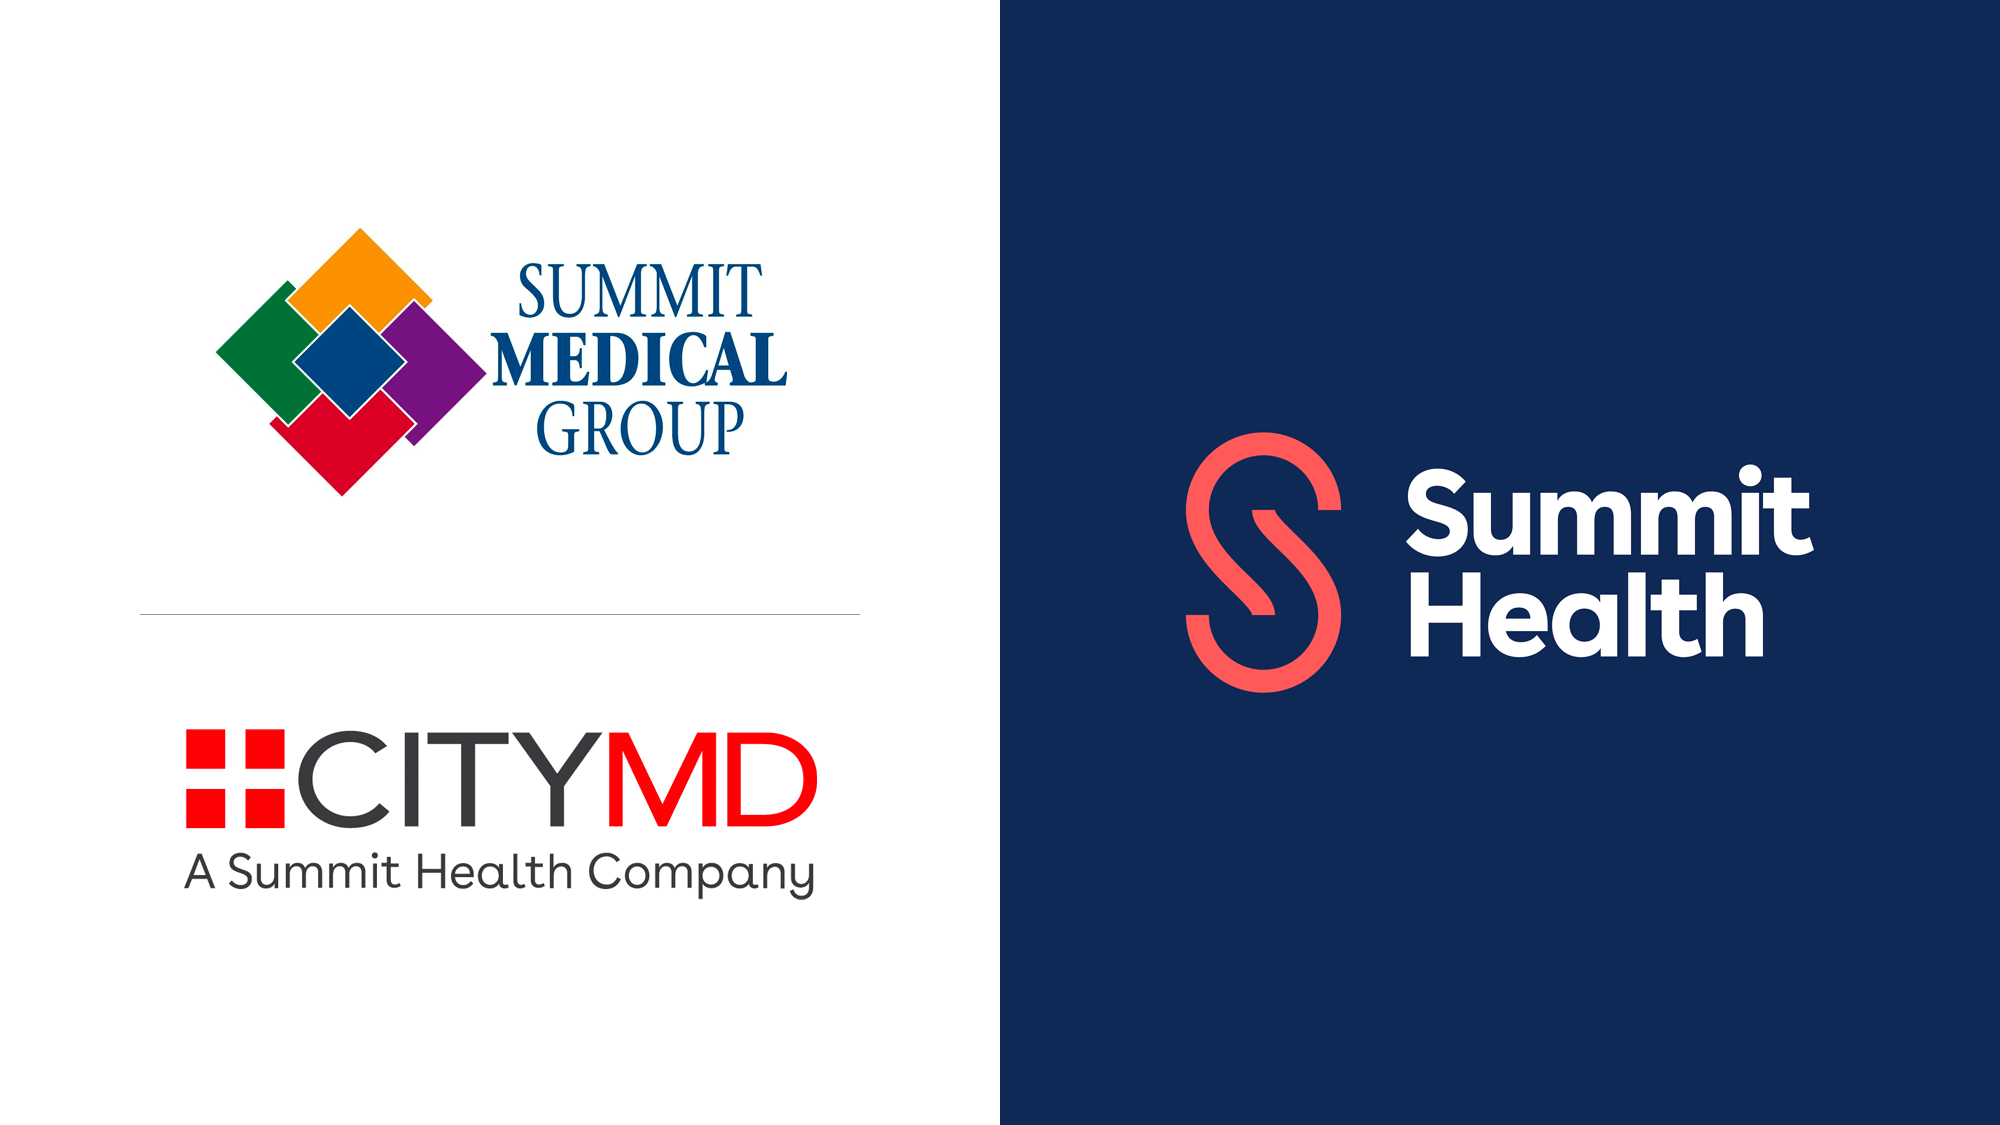 Brand New: New Logo and Identity for Summit Health by Elmwood